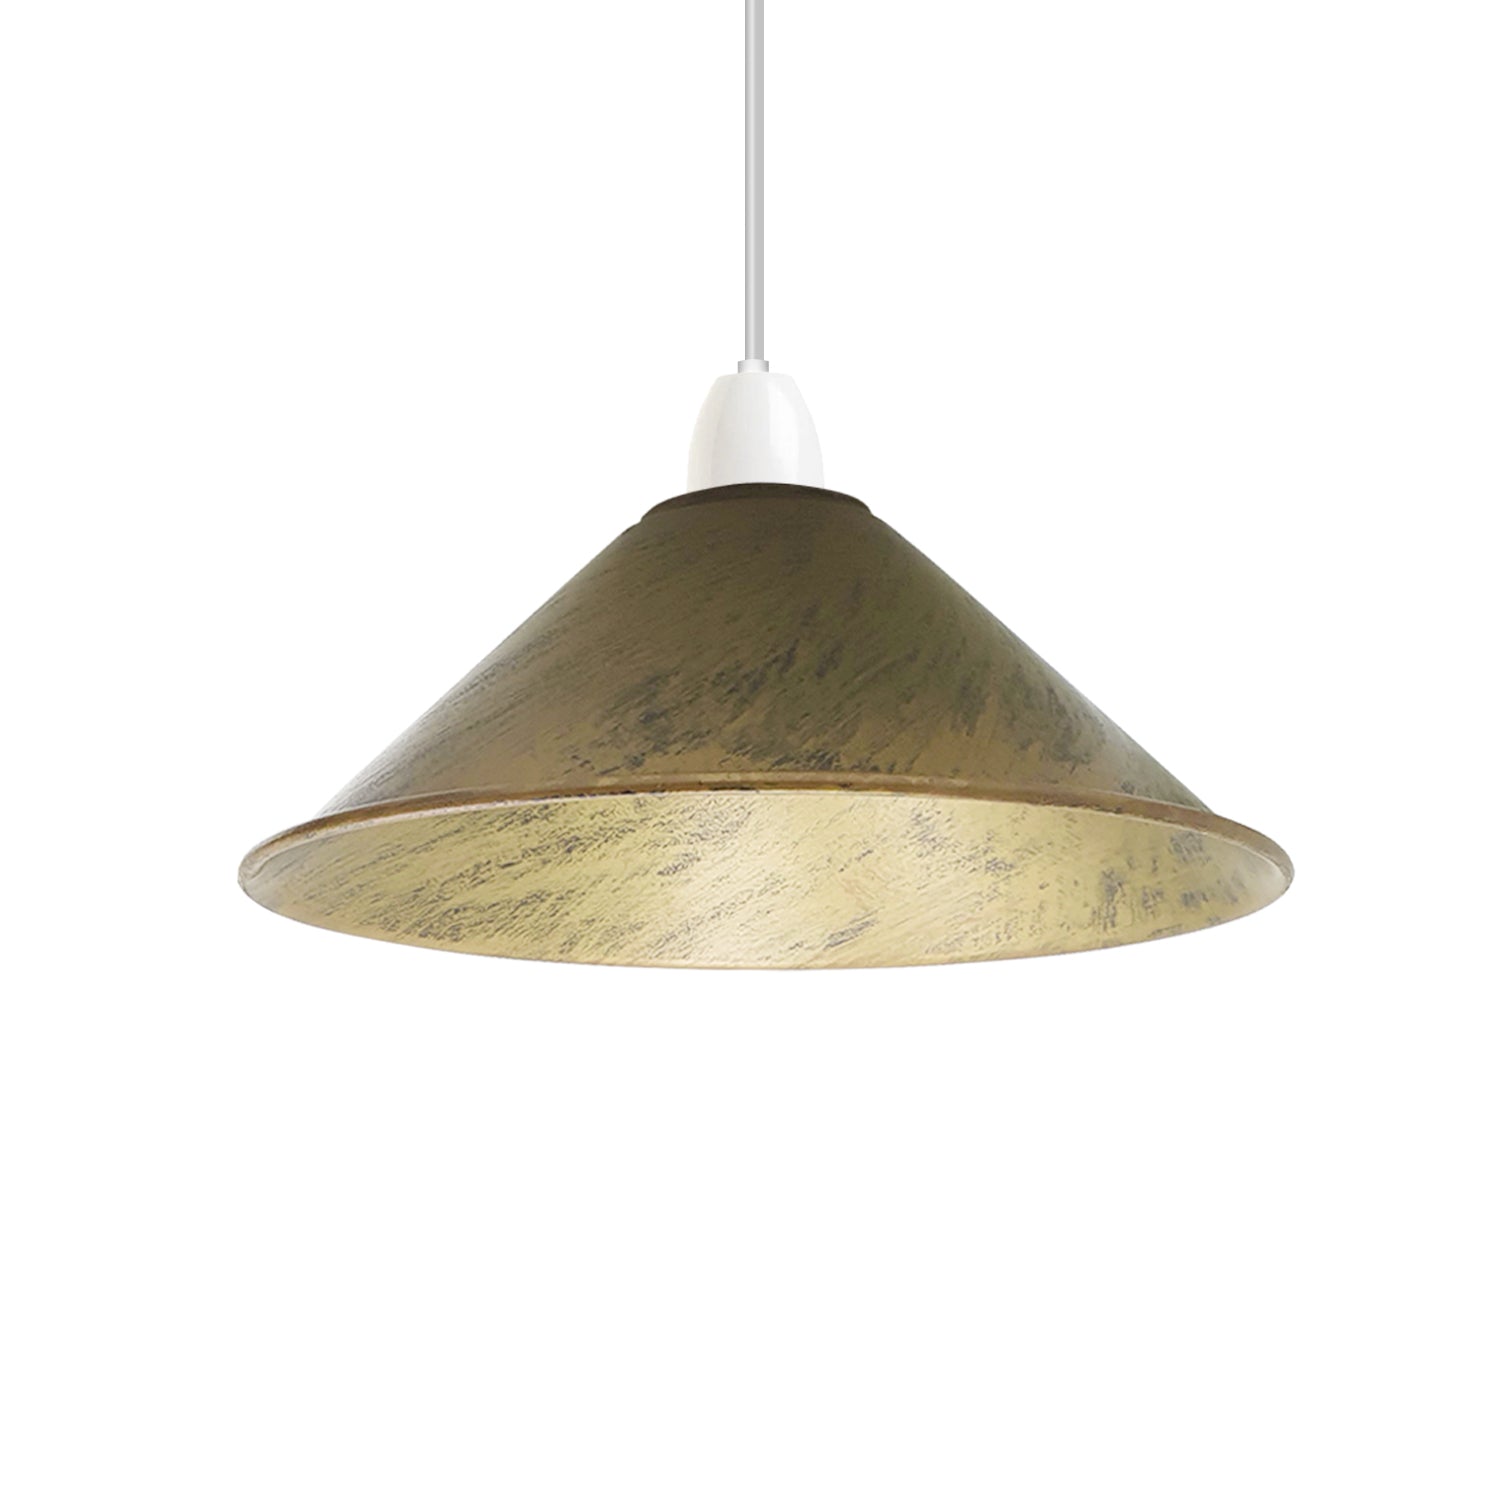 brushed copper lamp shade for indoor lamps